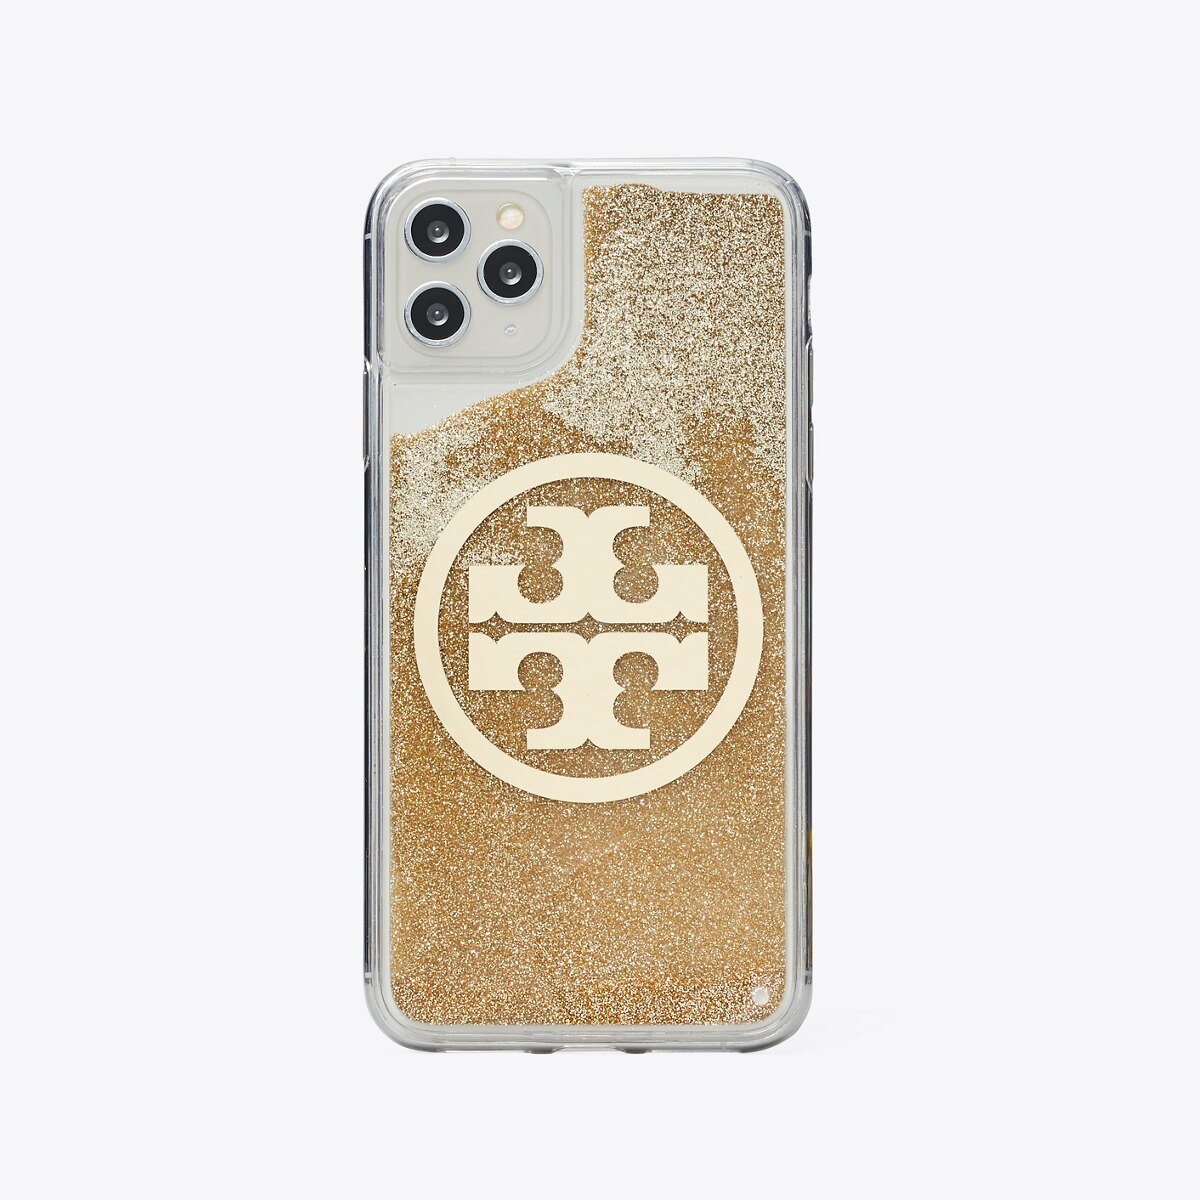 Perry Bombé Glitter Phone Case for iPhone 11 Pro Max